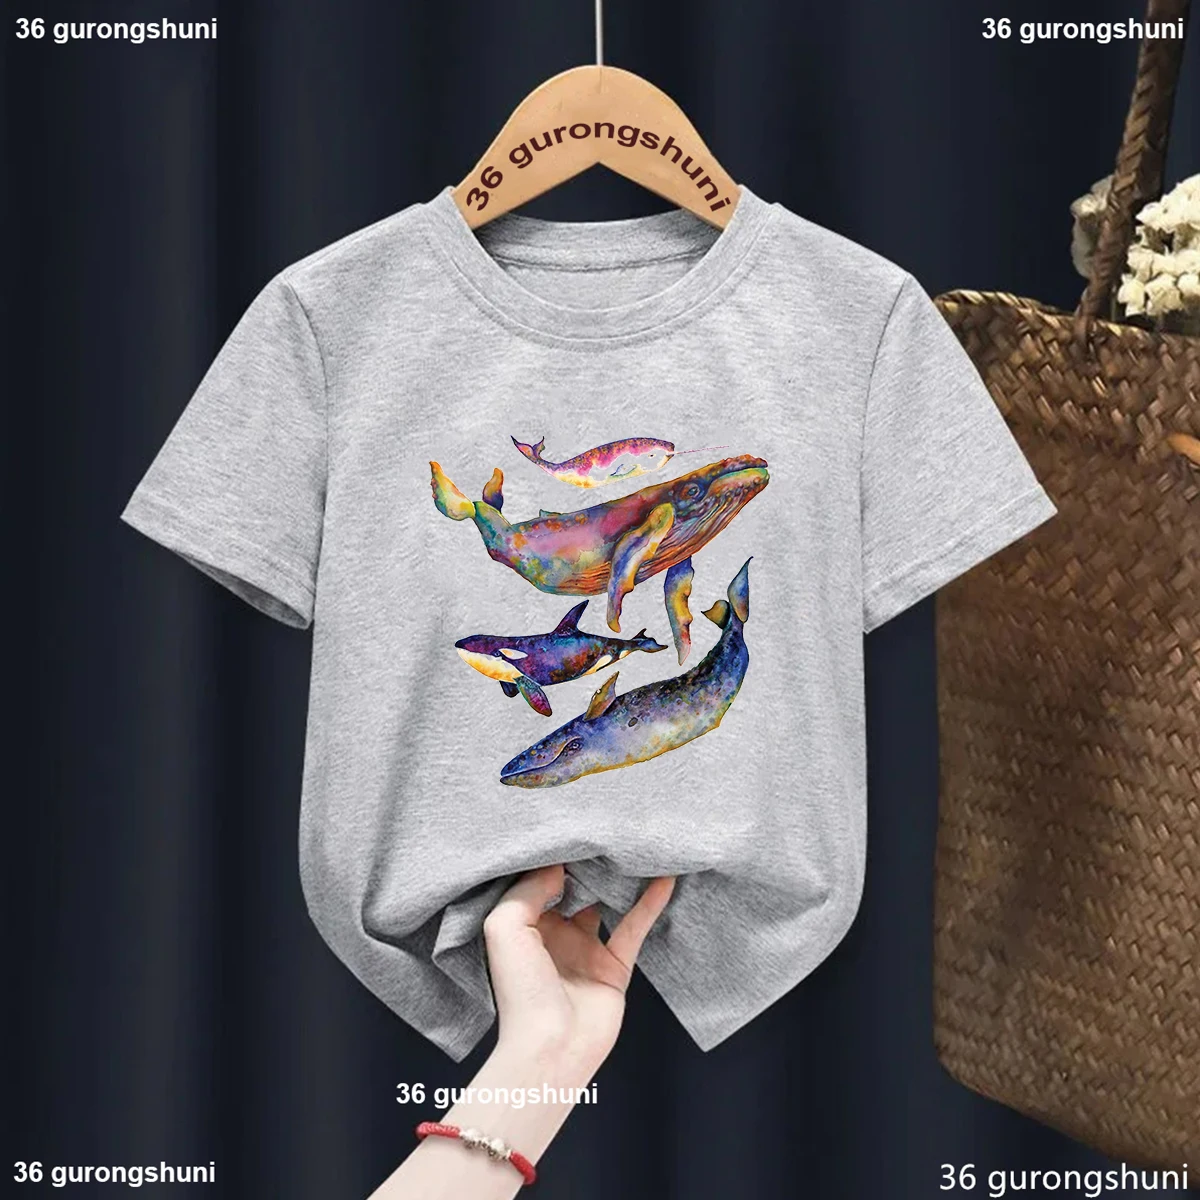 

Watercolor Dolphin Printed T Shirt For Girls/Boys Funny Kids Clothes White/Pink/Blue/Gray Tshirt Summer Fashion Tops Tee Shirt